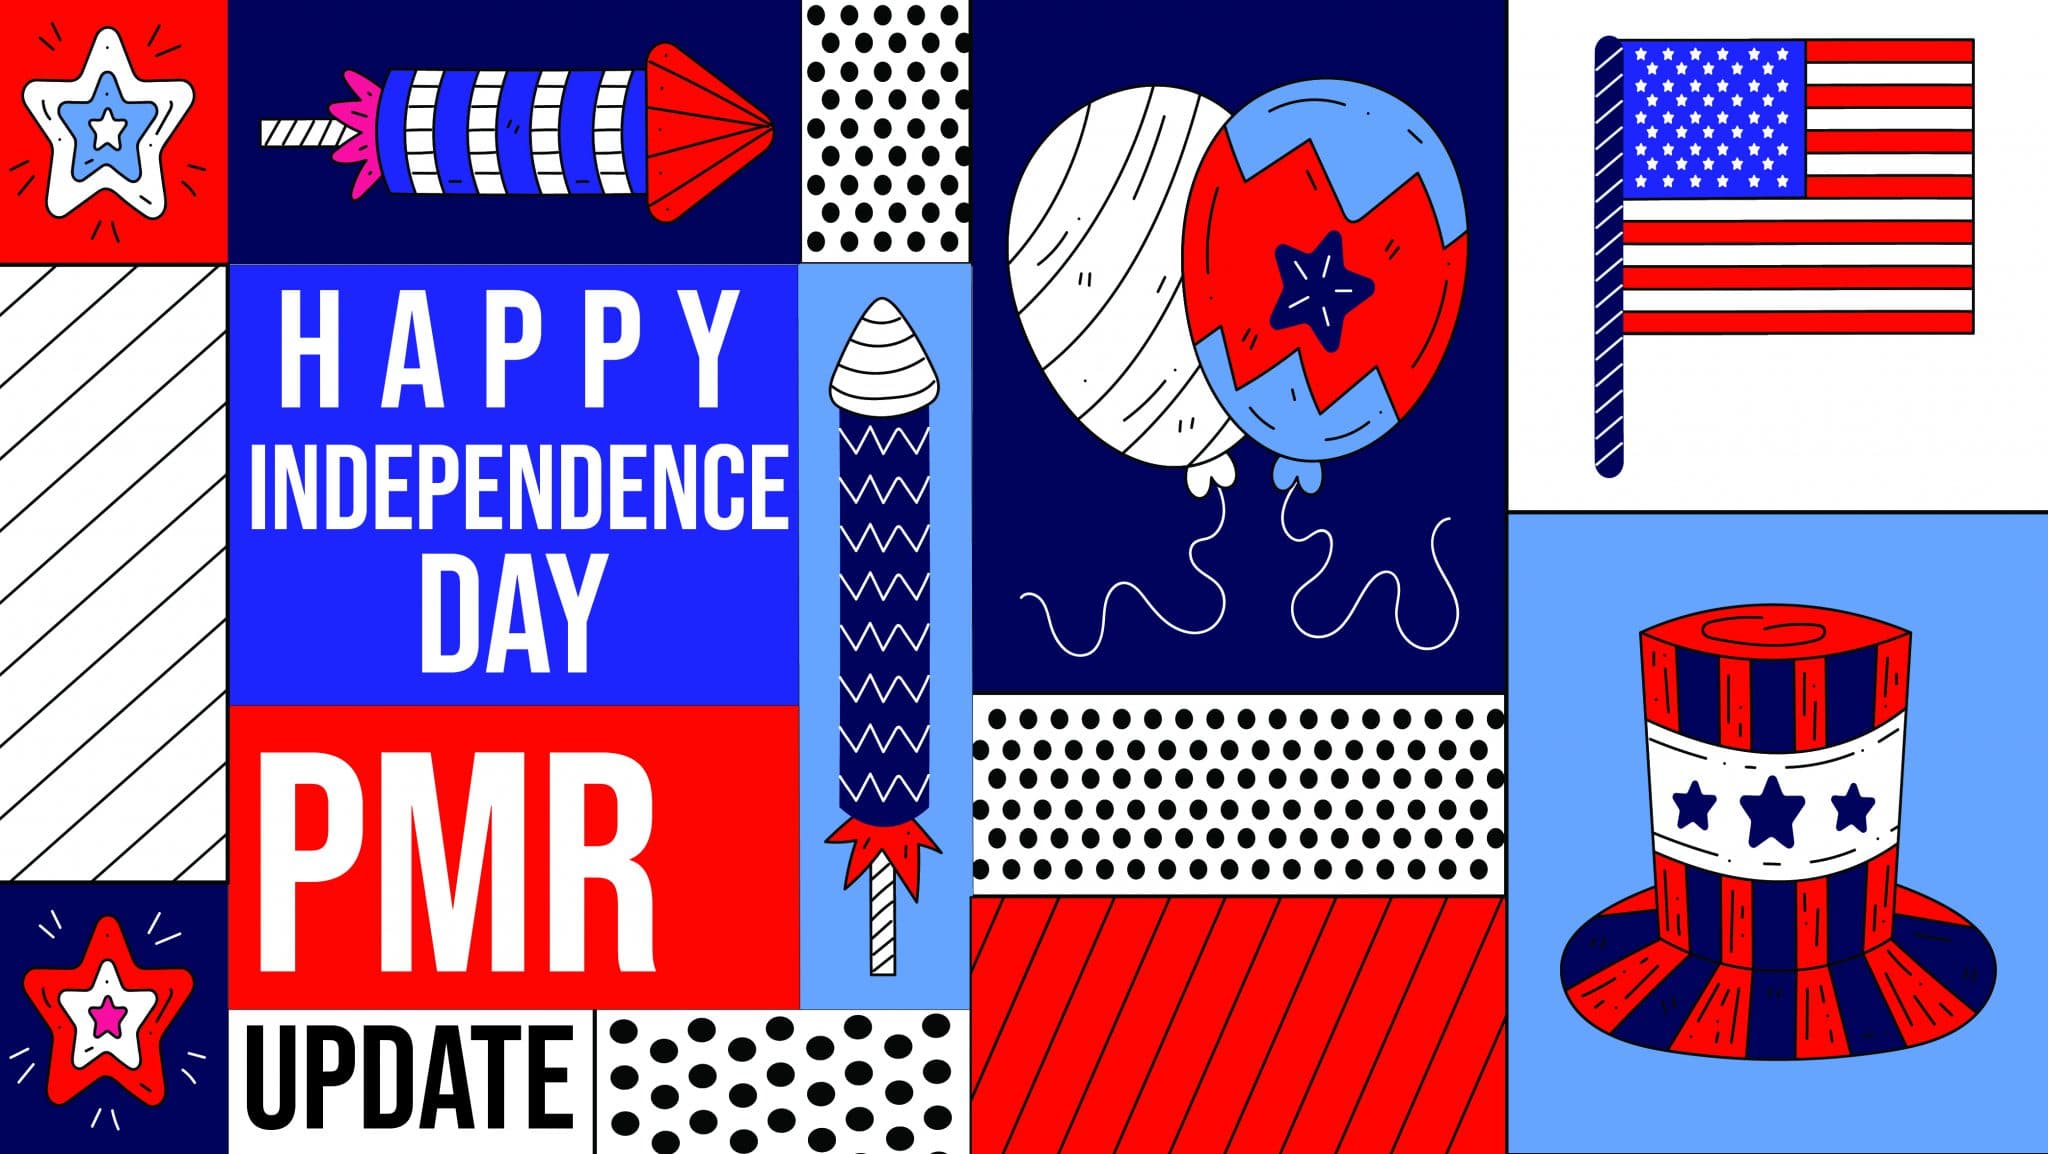 Happy Independence Day and PMR Update